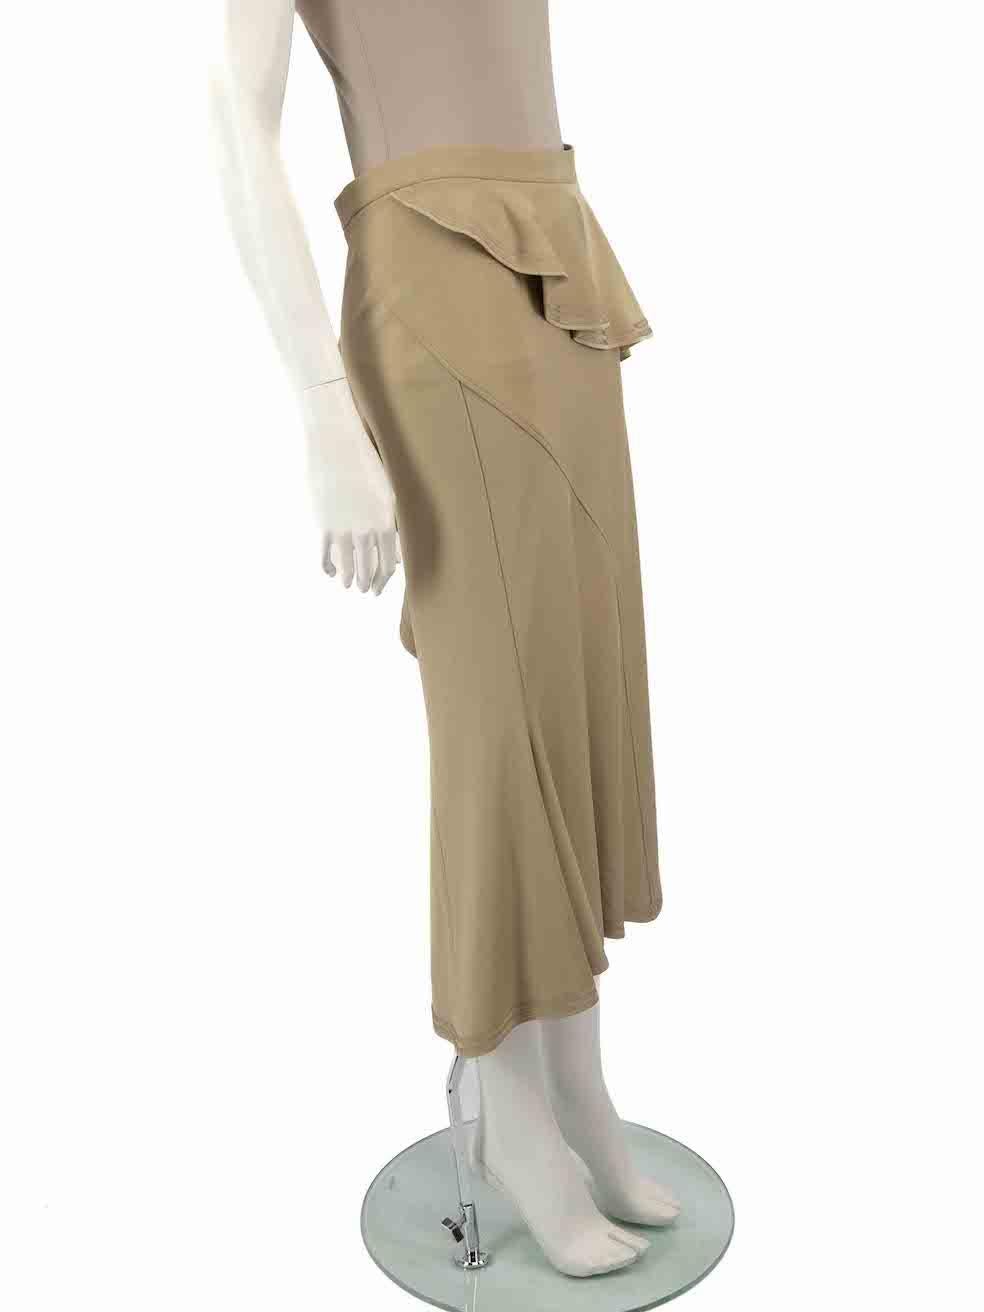 CONDITION is Very good. Hardly any visible wear to skirt is evident on this used Givenchy designer resale item.
 
 
 
 Details
 
 
 Beige
 
 Viscose
 
 Skirt
 
 Ruffle detail
 
 Midi
 
 Figure hugging fit
 
 Flared peplum hem
 
 Back zip and hook